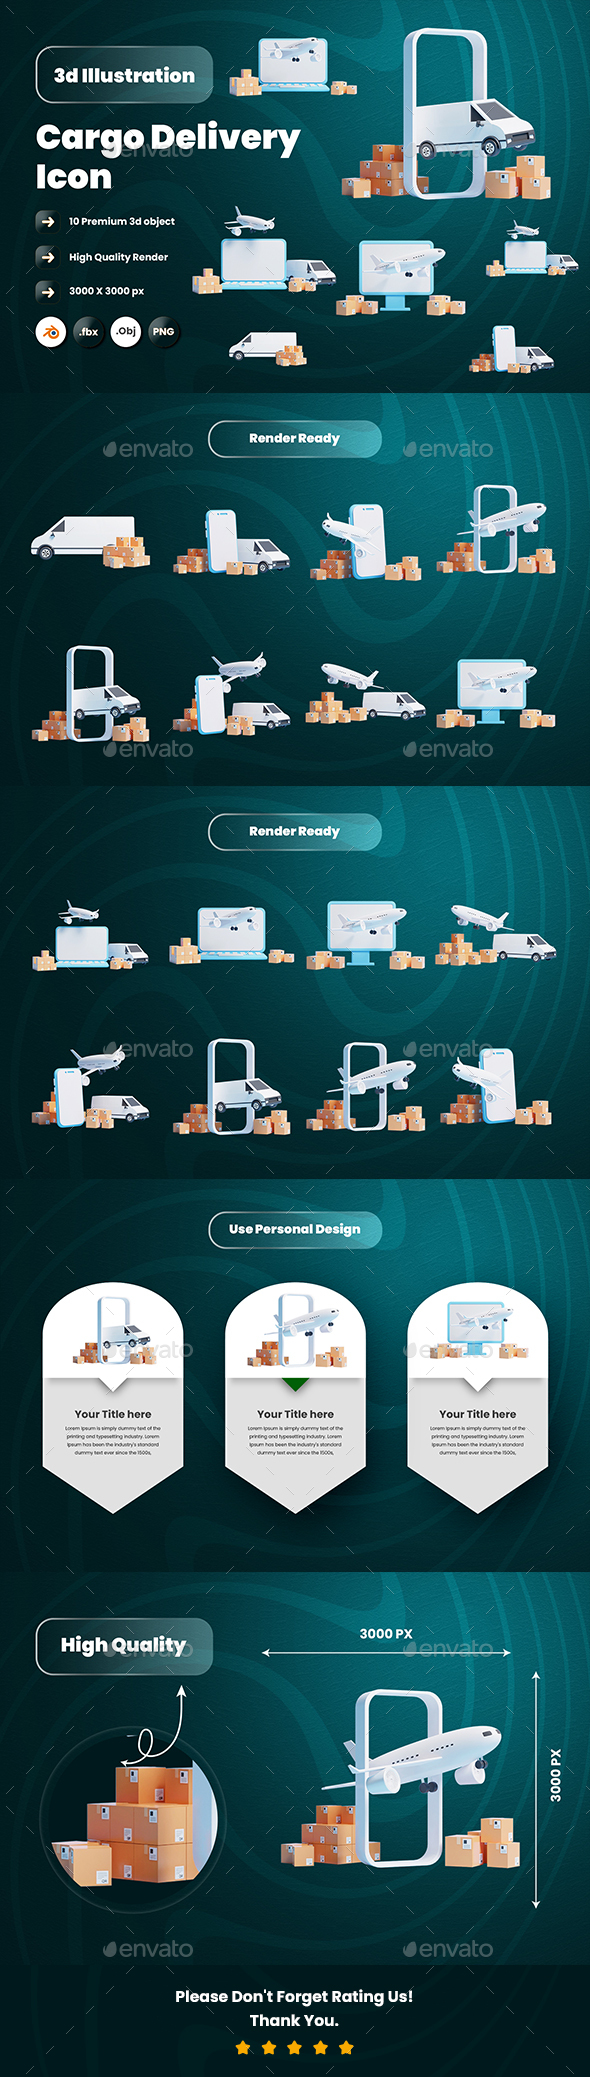 [DOWNLOAD]Cargo Delivery 3d Illustration Icon Pack-2